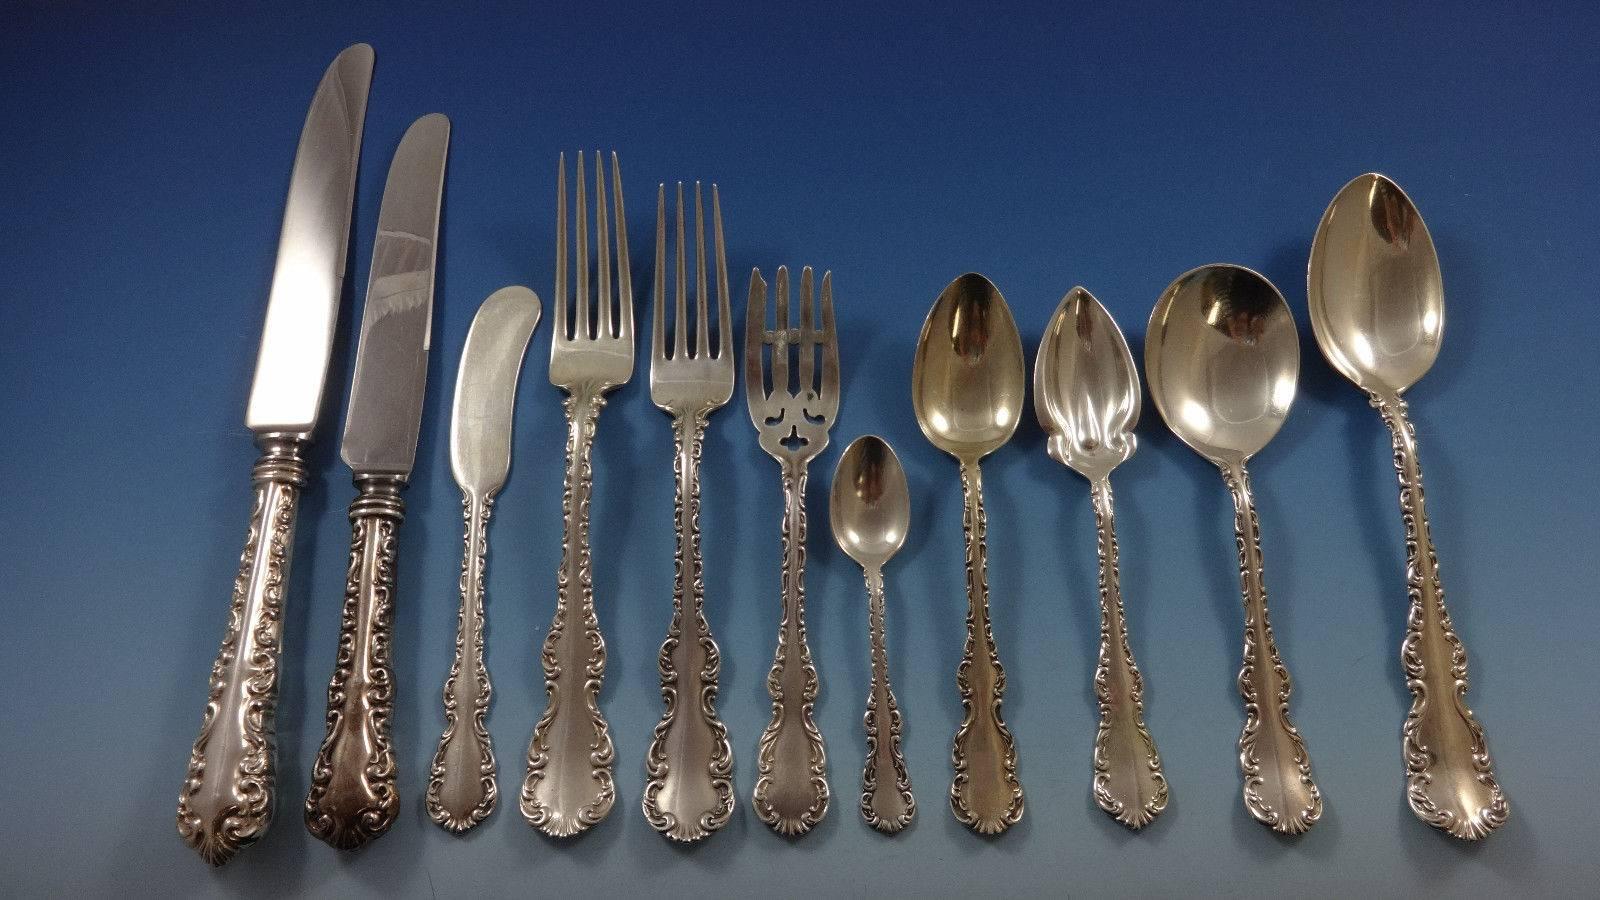 Beautiful Louis XV by Birks (Canadian) sterling silver flatware set of 90 pieces. This set includes:

Eight dinner knives, 9 3/4